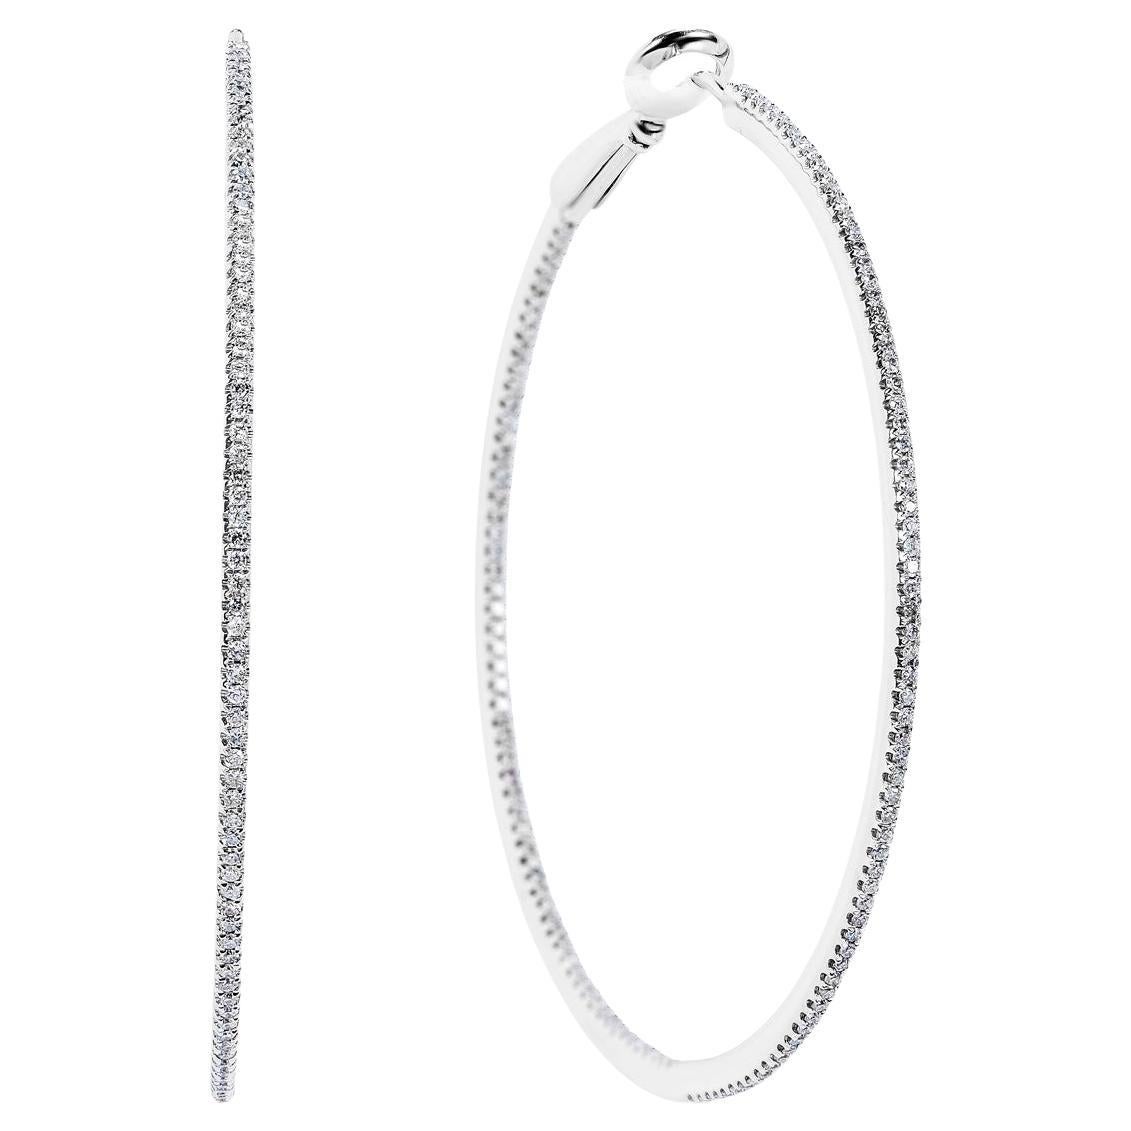 0.85 Carat Round Brilliant 2 Inch Whisper Thin Diamond Hoop Earrings Certified For Sale